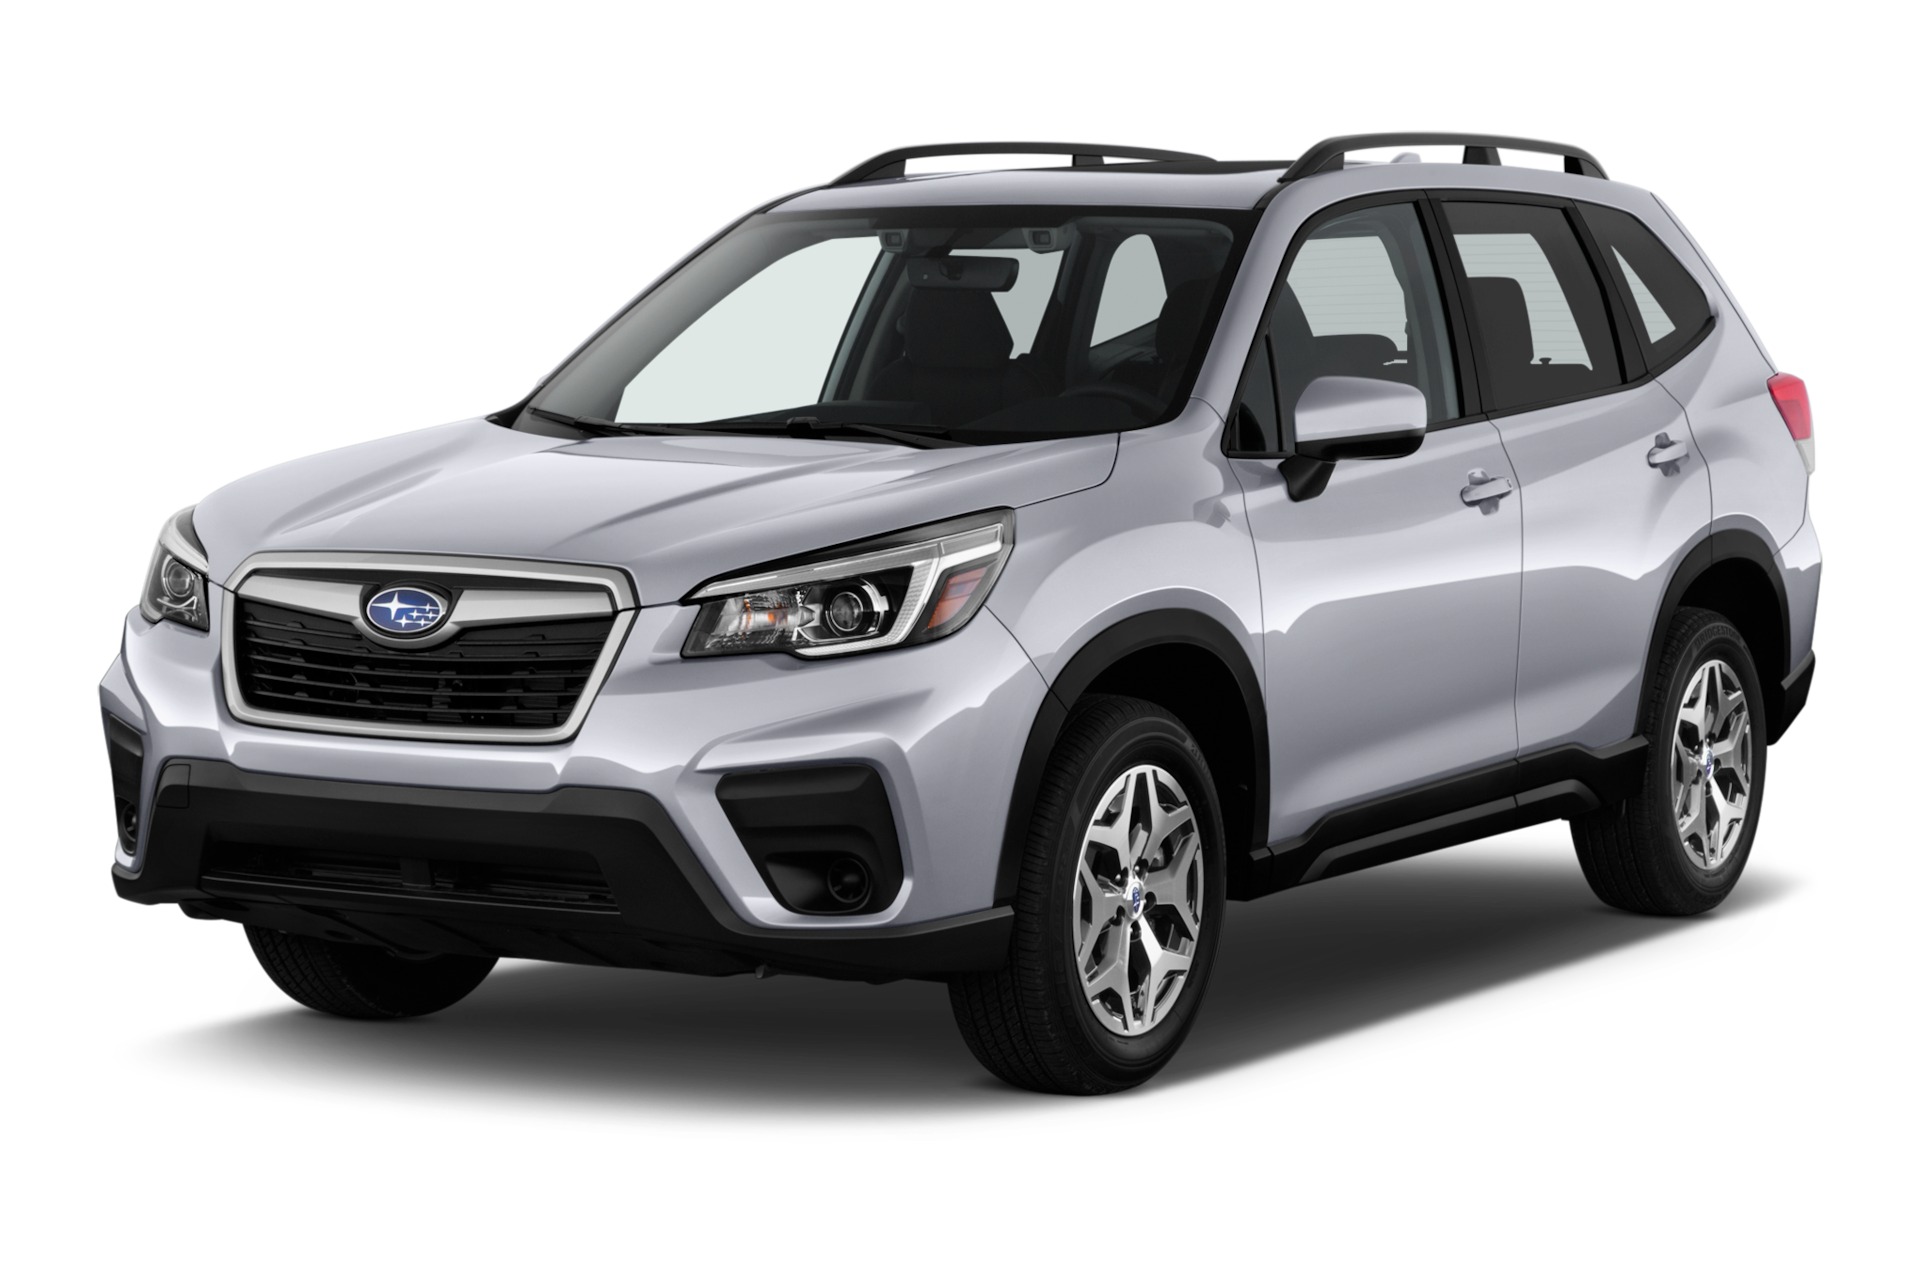 2020 Subaru Forester Prices, Reviews, and Photos - MotorTrend